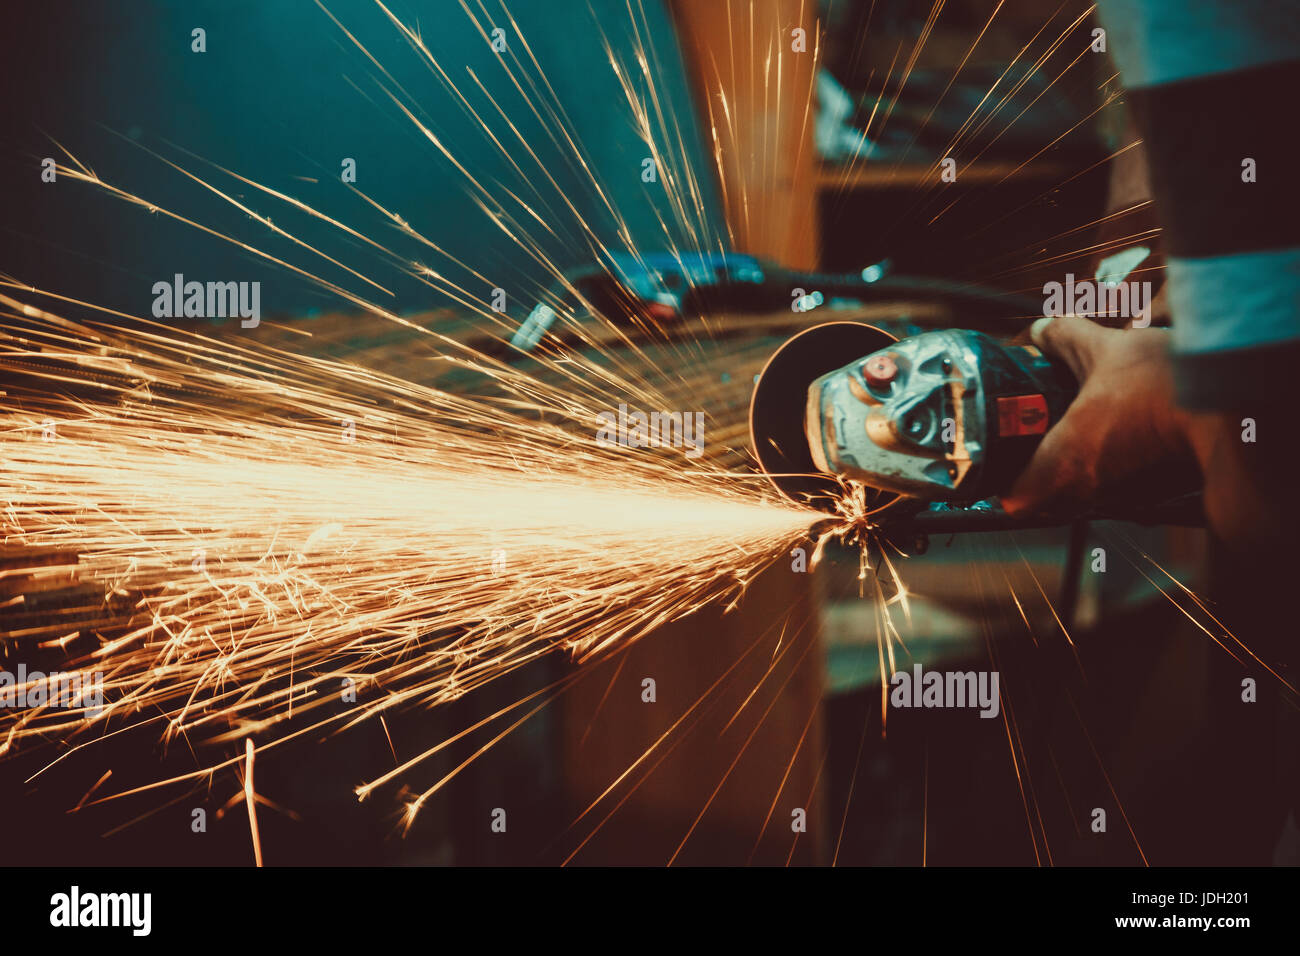 Sparks during cutting of metal angle grinder. Close-up saw sawing a steel. Soft focus. Shallow DOF. Stock Photo